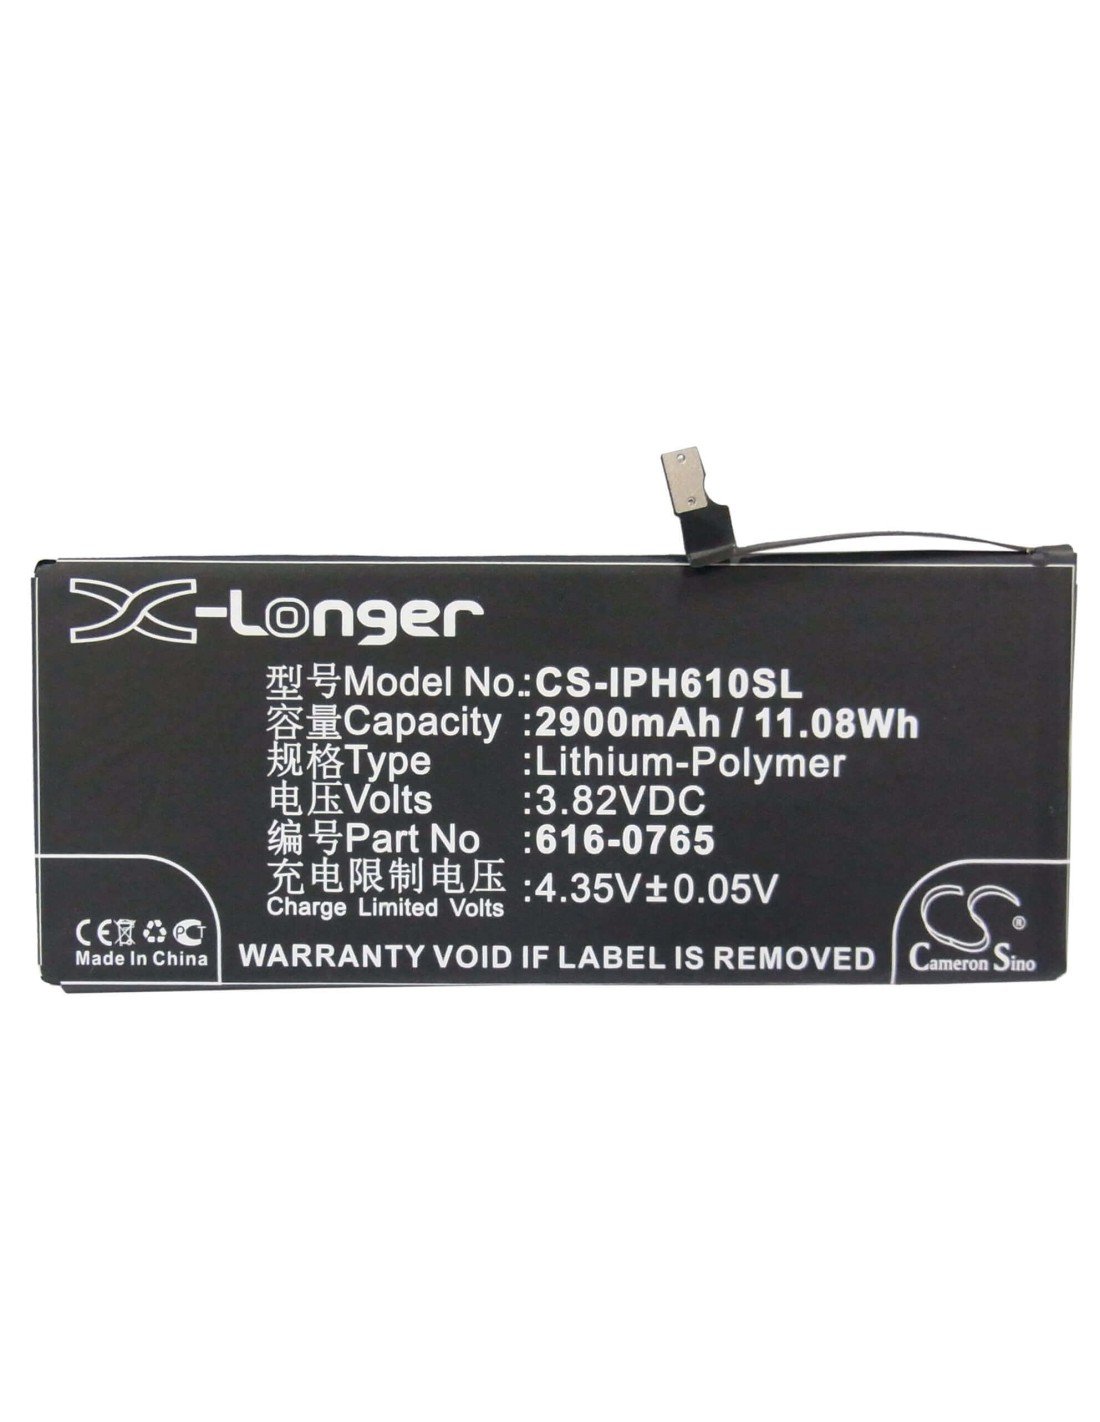 Battery for Apple iPhone 6 Plus, iPhone 6 5.5, A1593 3.82V, 2900mAh - 11.08Wh